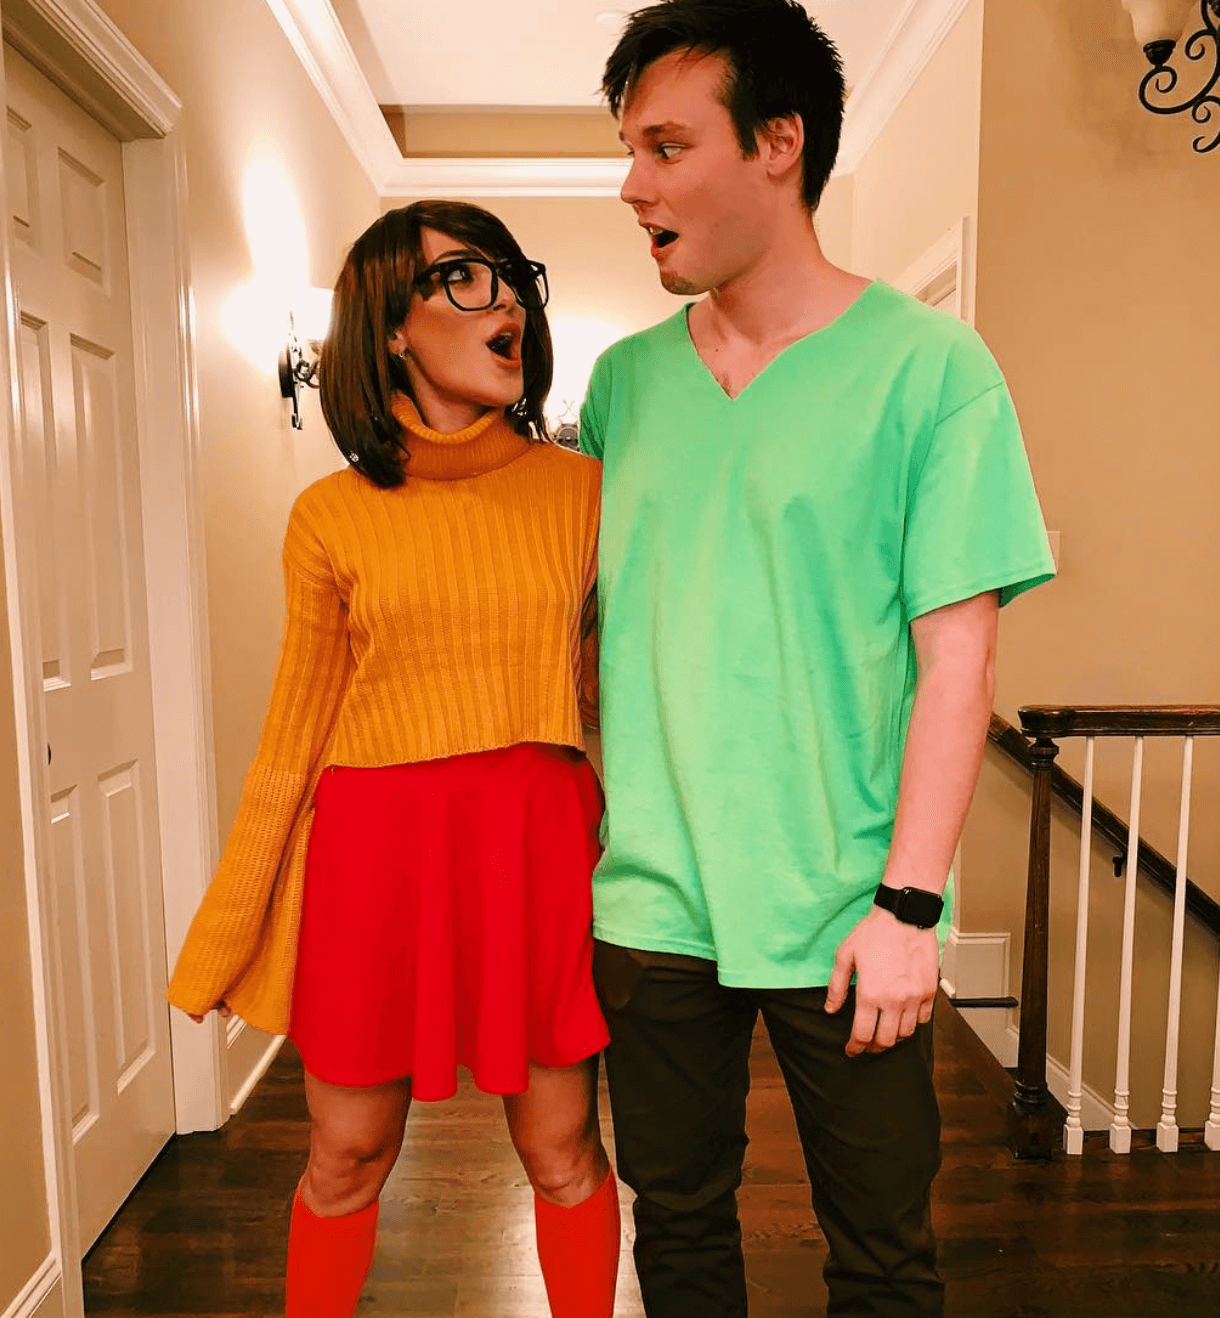 16 Funny Couples Halloween Costume Ideas Perfect For Last Minute Parties 0037